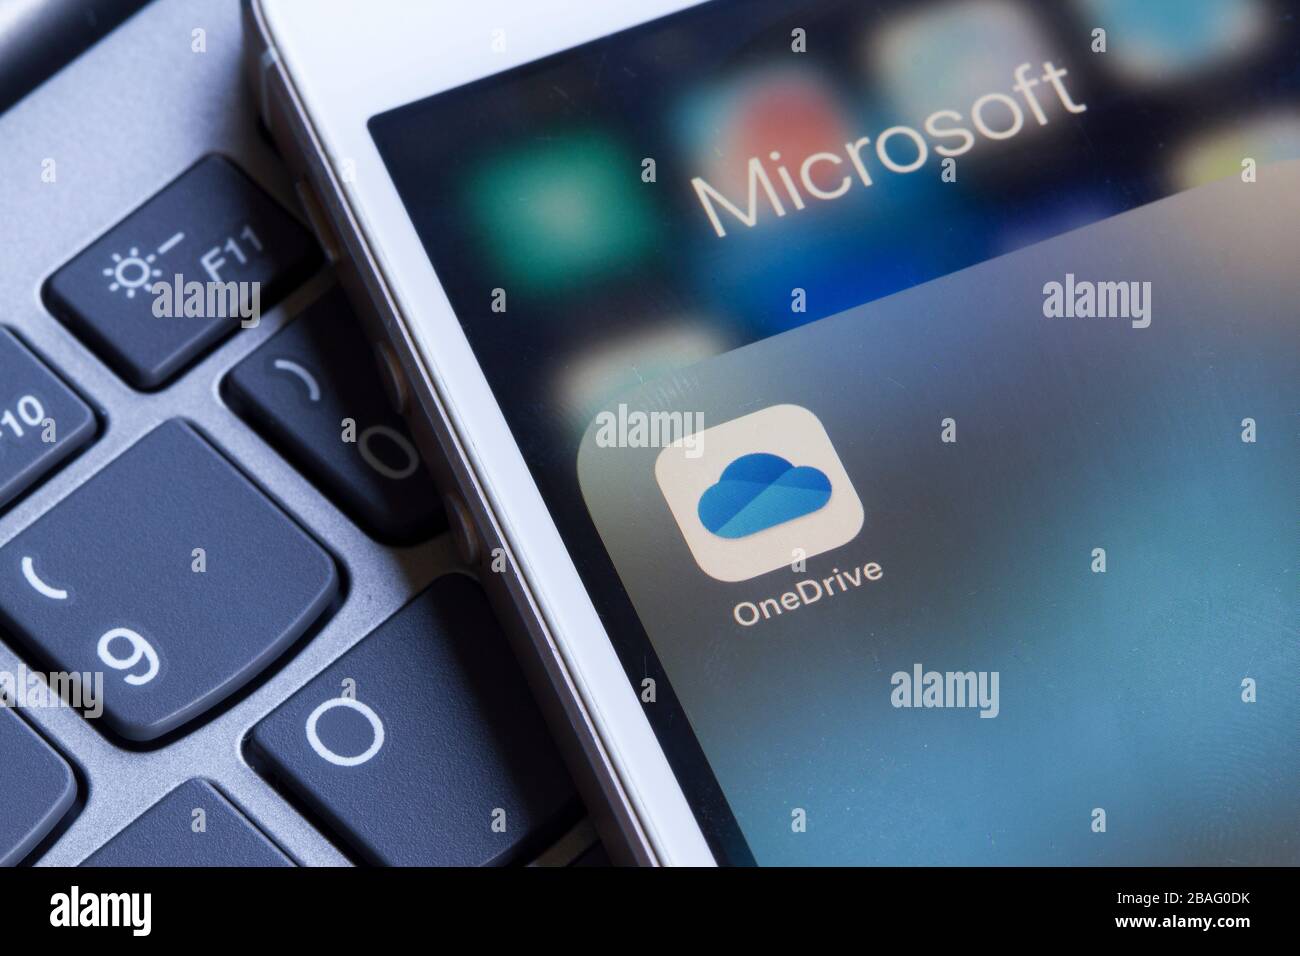 Microsoft OneDrive mobile app icon is seen on a smartphone. OneDrive is Microsoft's personal cloud storage service solution for file hosting. Stock Photo